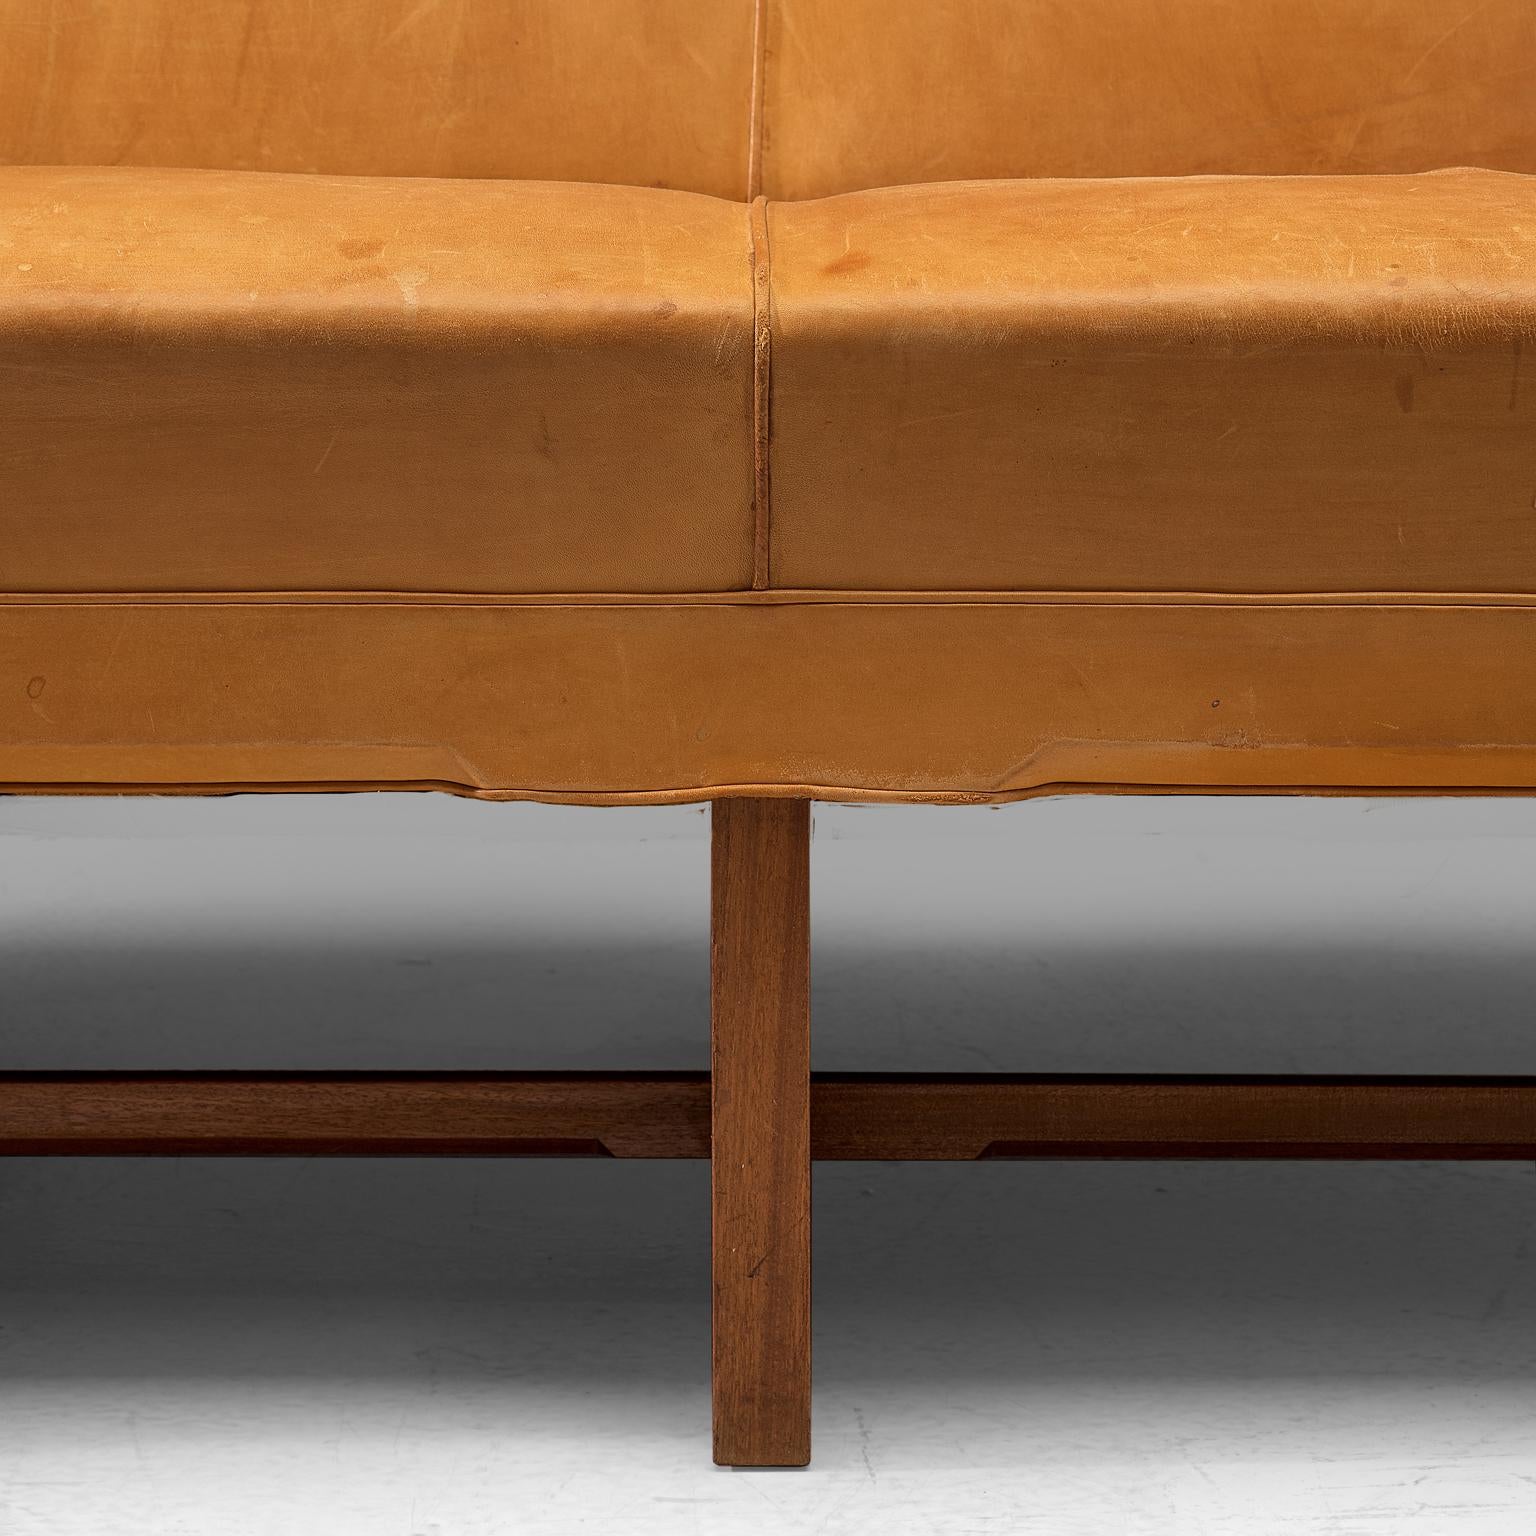 Kaare Klint for Rud Rasmussen cabinetmakers, three-seat sofa model 5011, leather and mahogany, Denmark, design 1935, manufactured in early 1970s.

Classic and elegant Scandinavian three-seat sofa by Kaare Klint. This model was designed in 1935. This